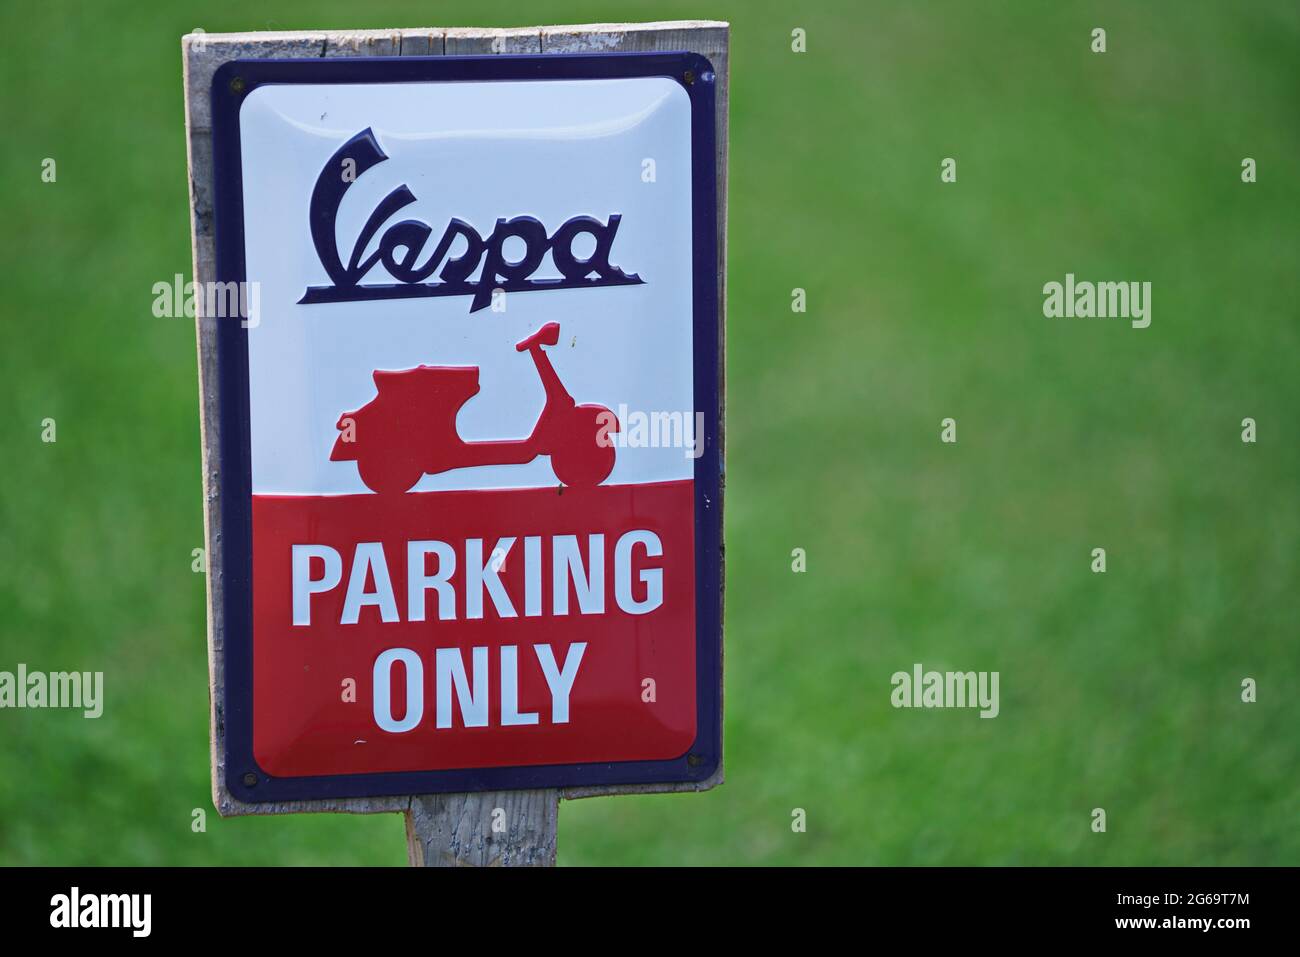 Close Up of Vespa motorcycle Parking Only Sign. Milan, Italy - July 2021 Stock Photo